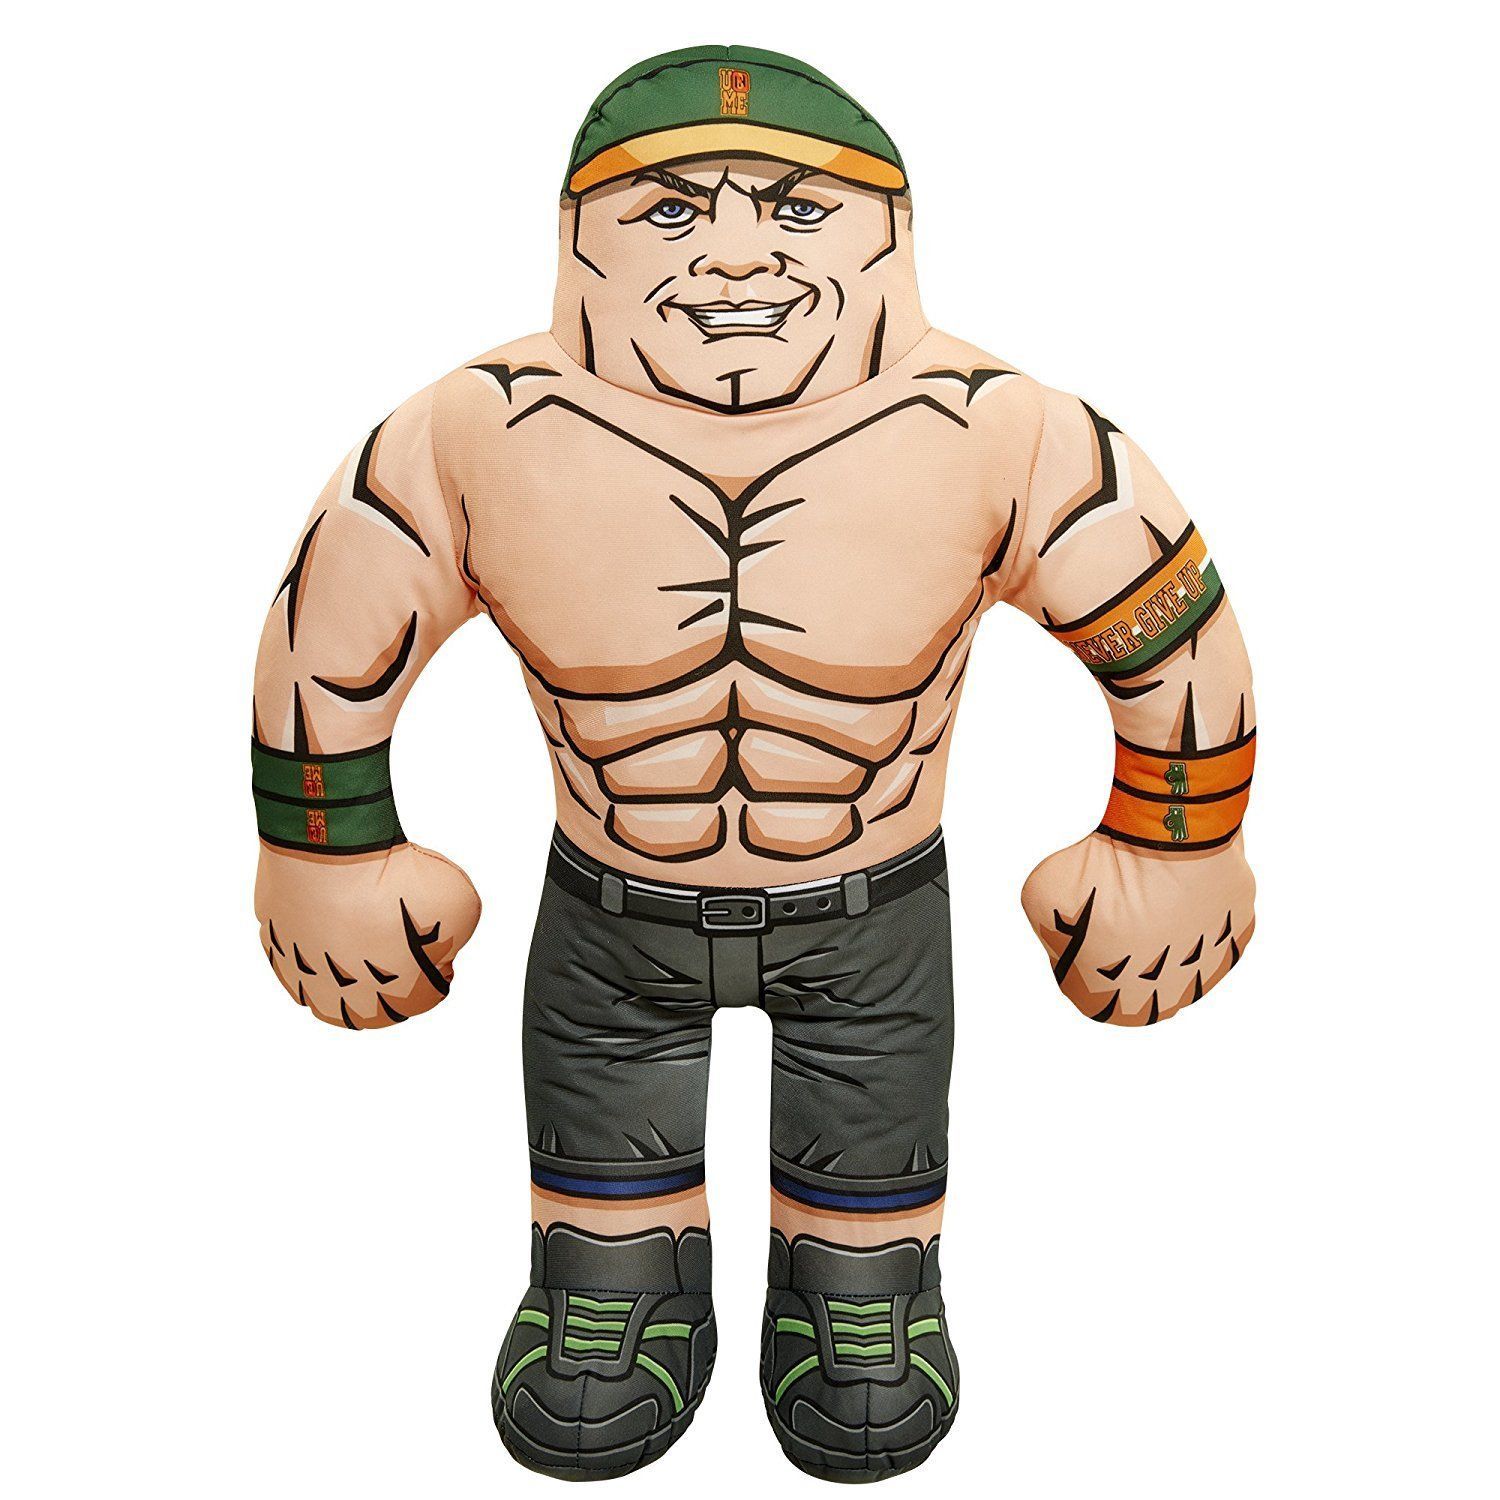 WWE John Cena Enormous Wrestling Buddy Plush ** Read more at the image link.